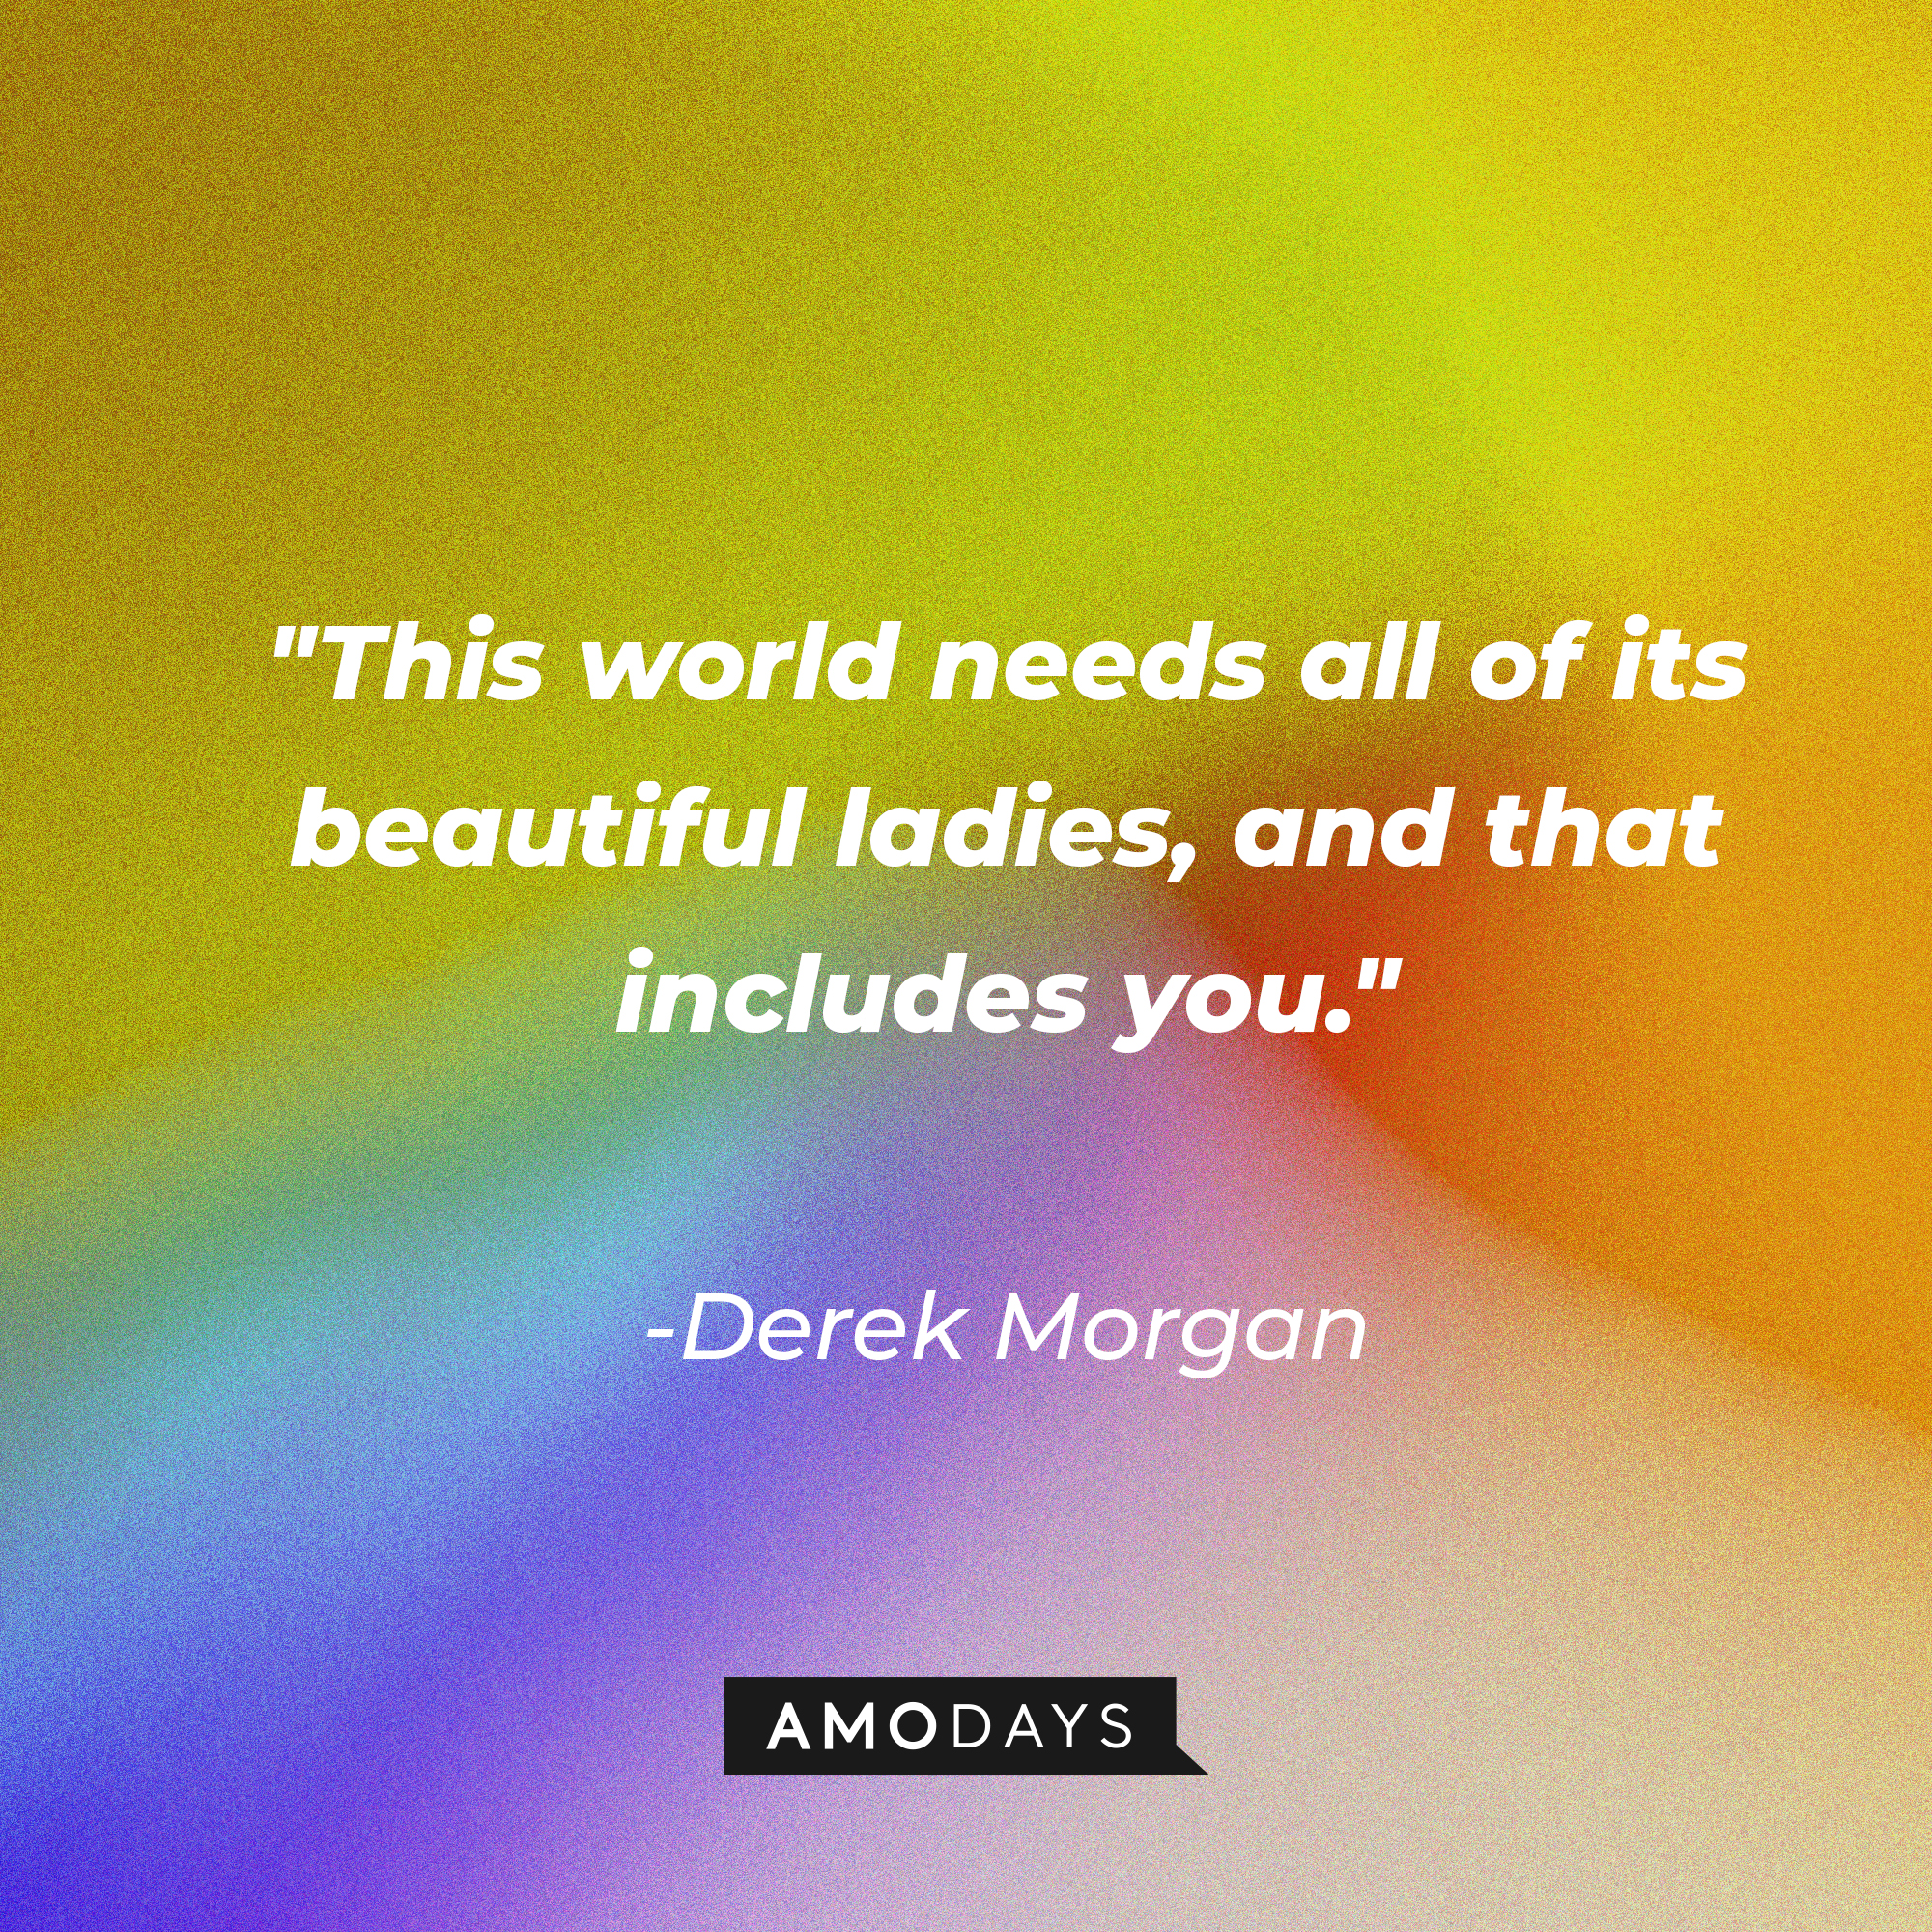 Derek Morgan's quote: "This world needs all of its beautiful ladies, and that includes you." | Source: AmoDays